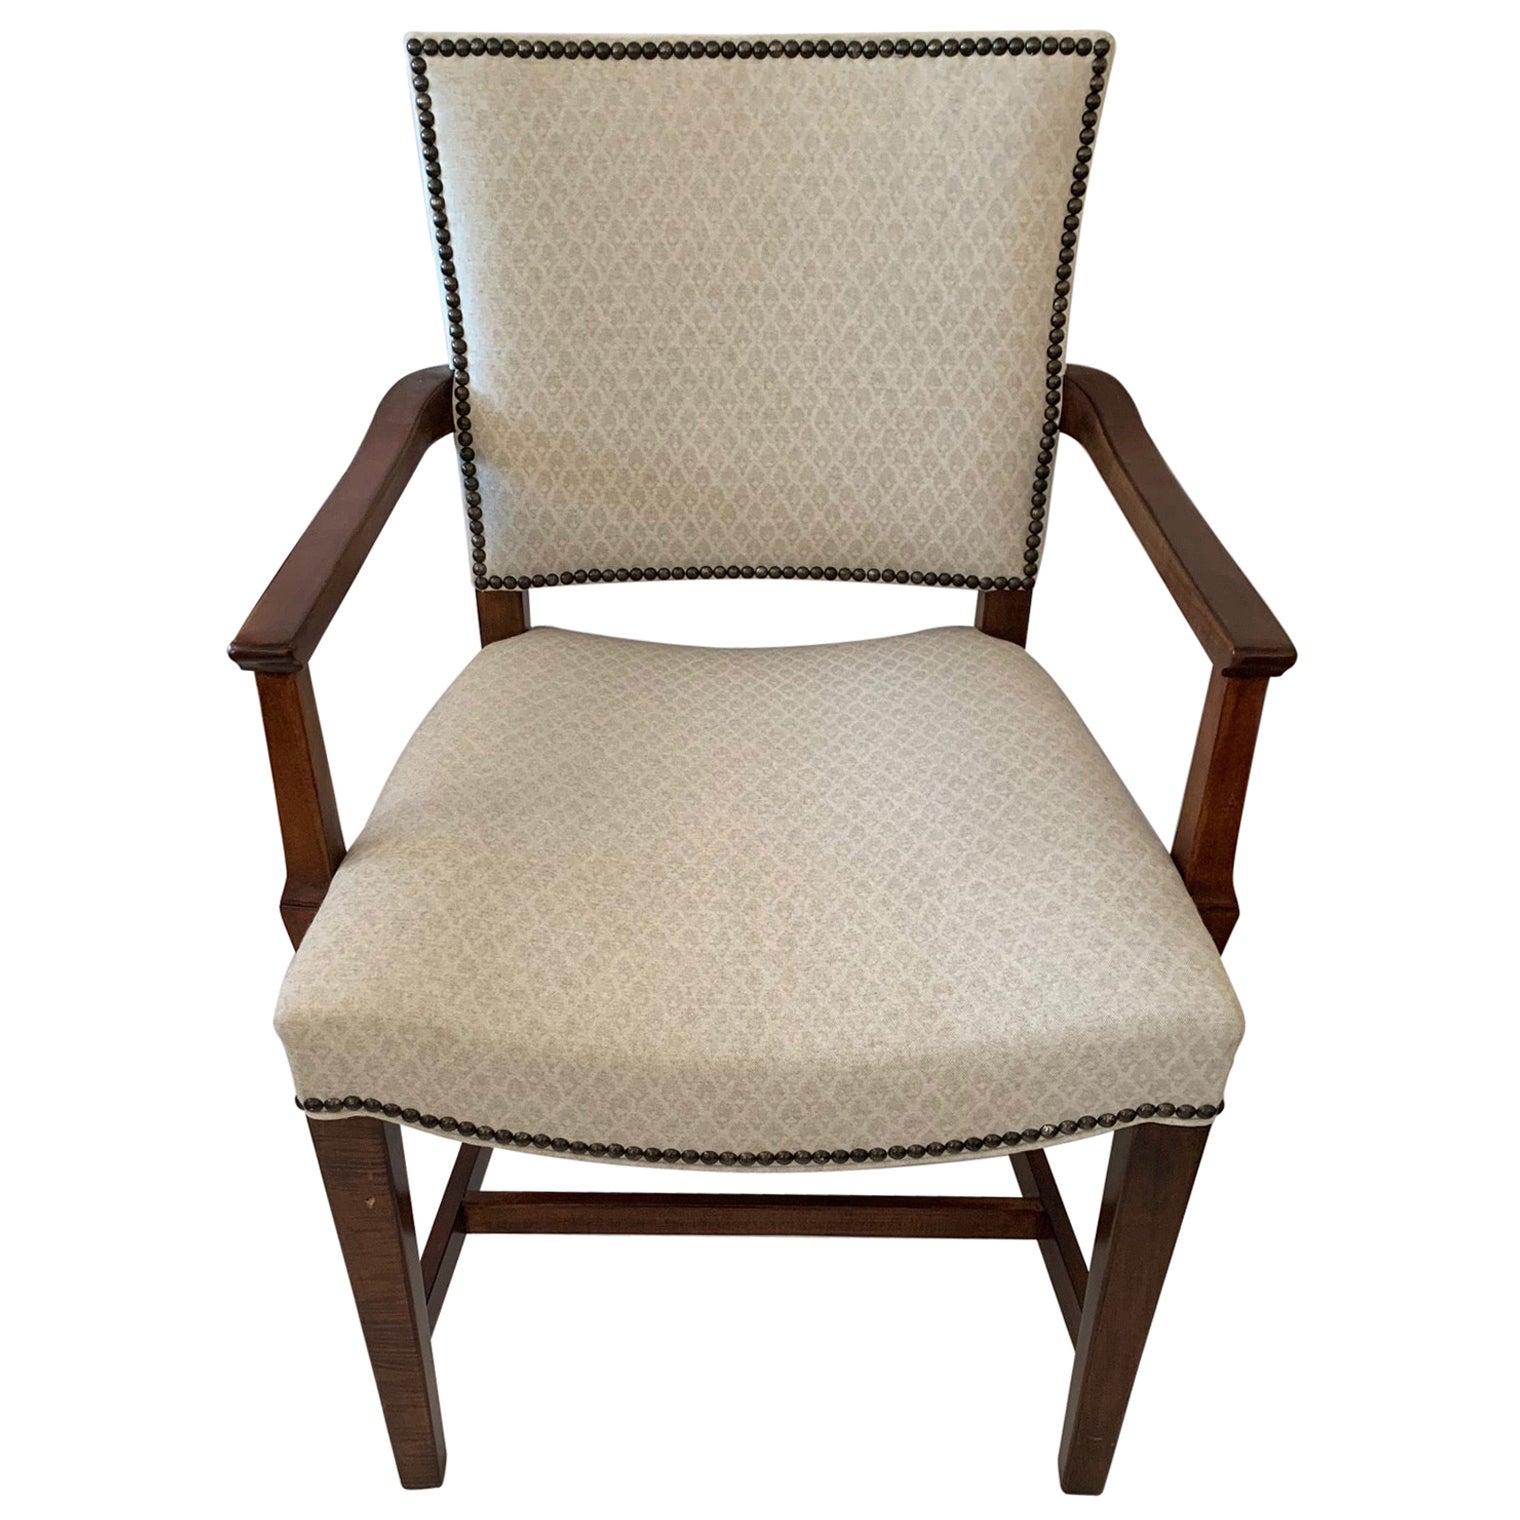 Versatile Walnut and Cream Upholstered Armchair with Nailheads